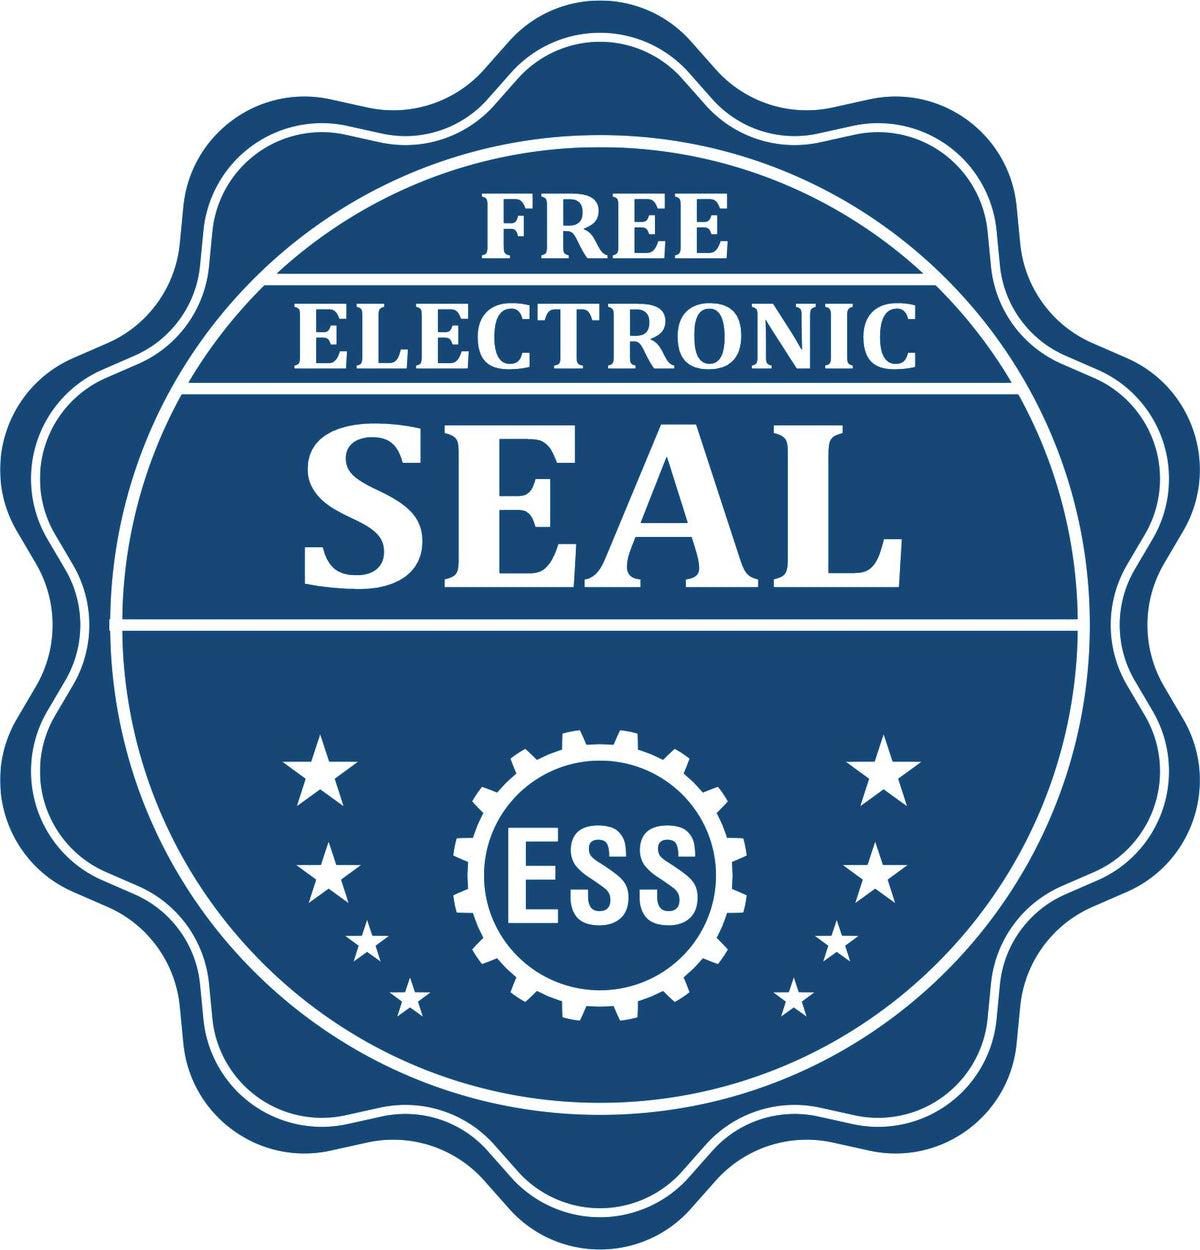 A badge showing a free electronic seal for the Montana Professional Engineer Seal Stamp with stars and the ESS gear on the emblem.